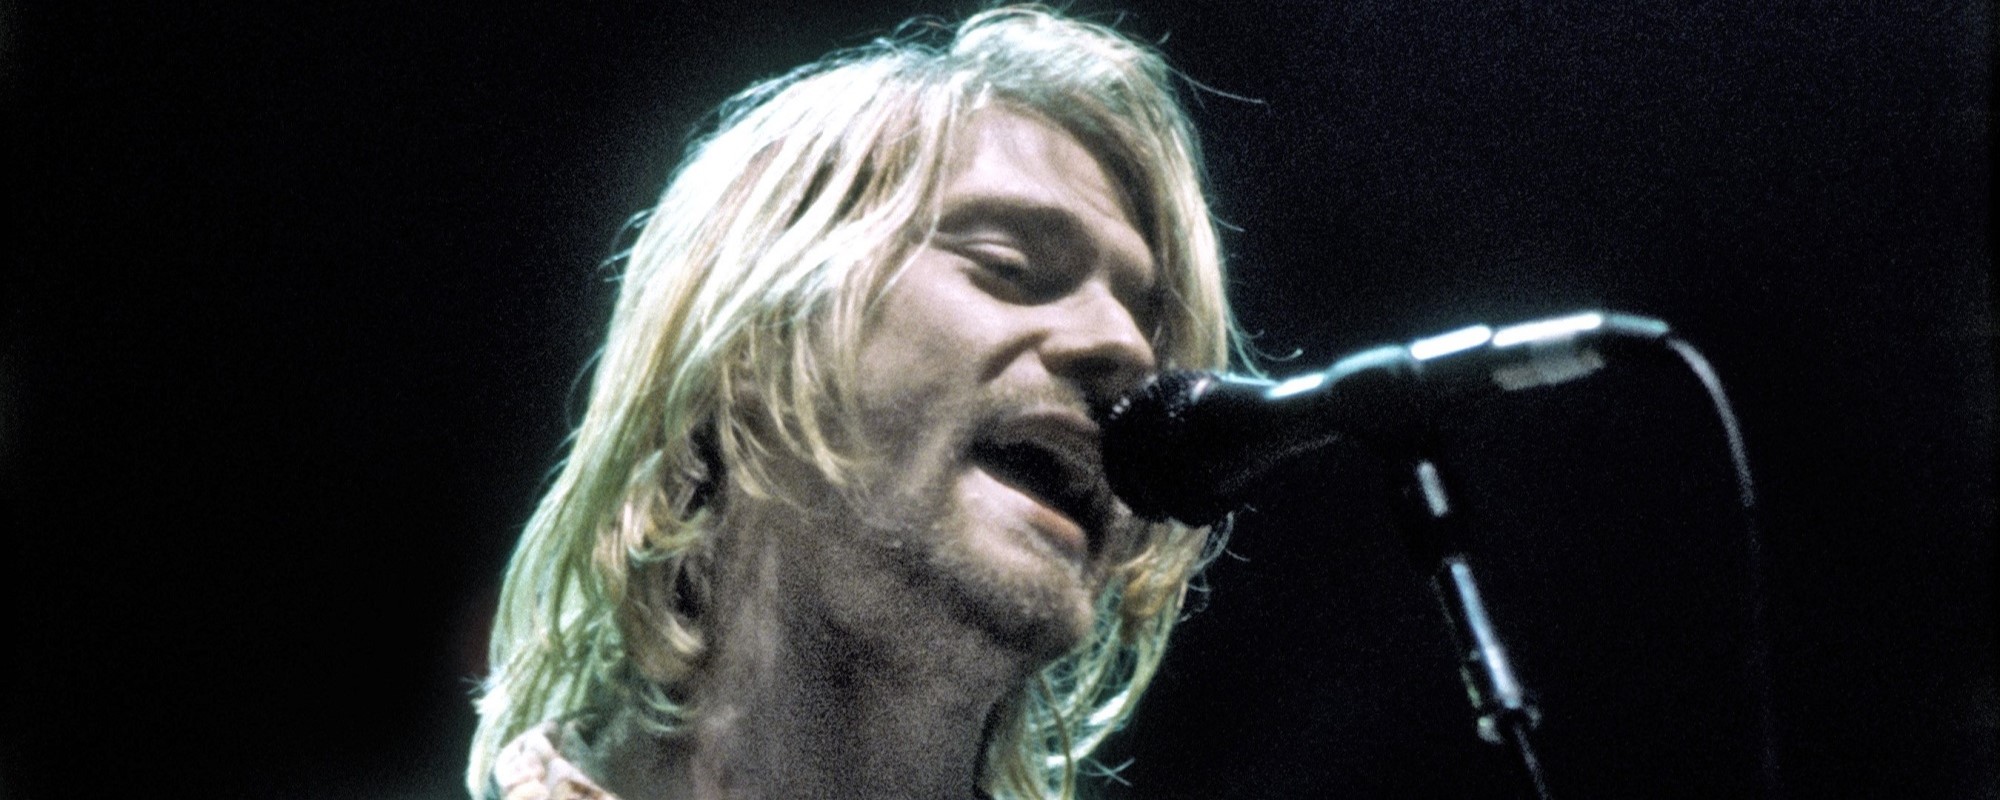 On the Anniversary of Kurt Cobain’s Death, Here’s a Look at Nirvana’s Scrapped Plans to Headline Lollapalooza 1994